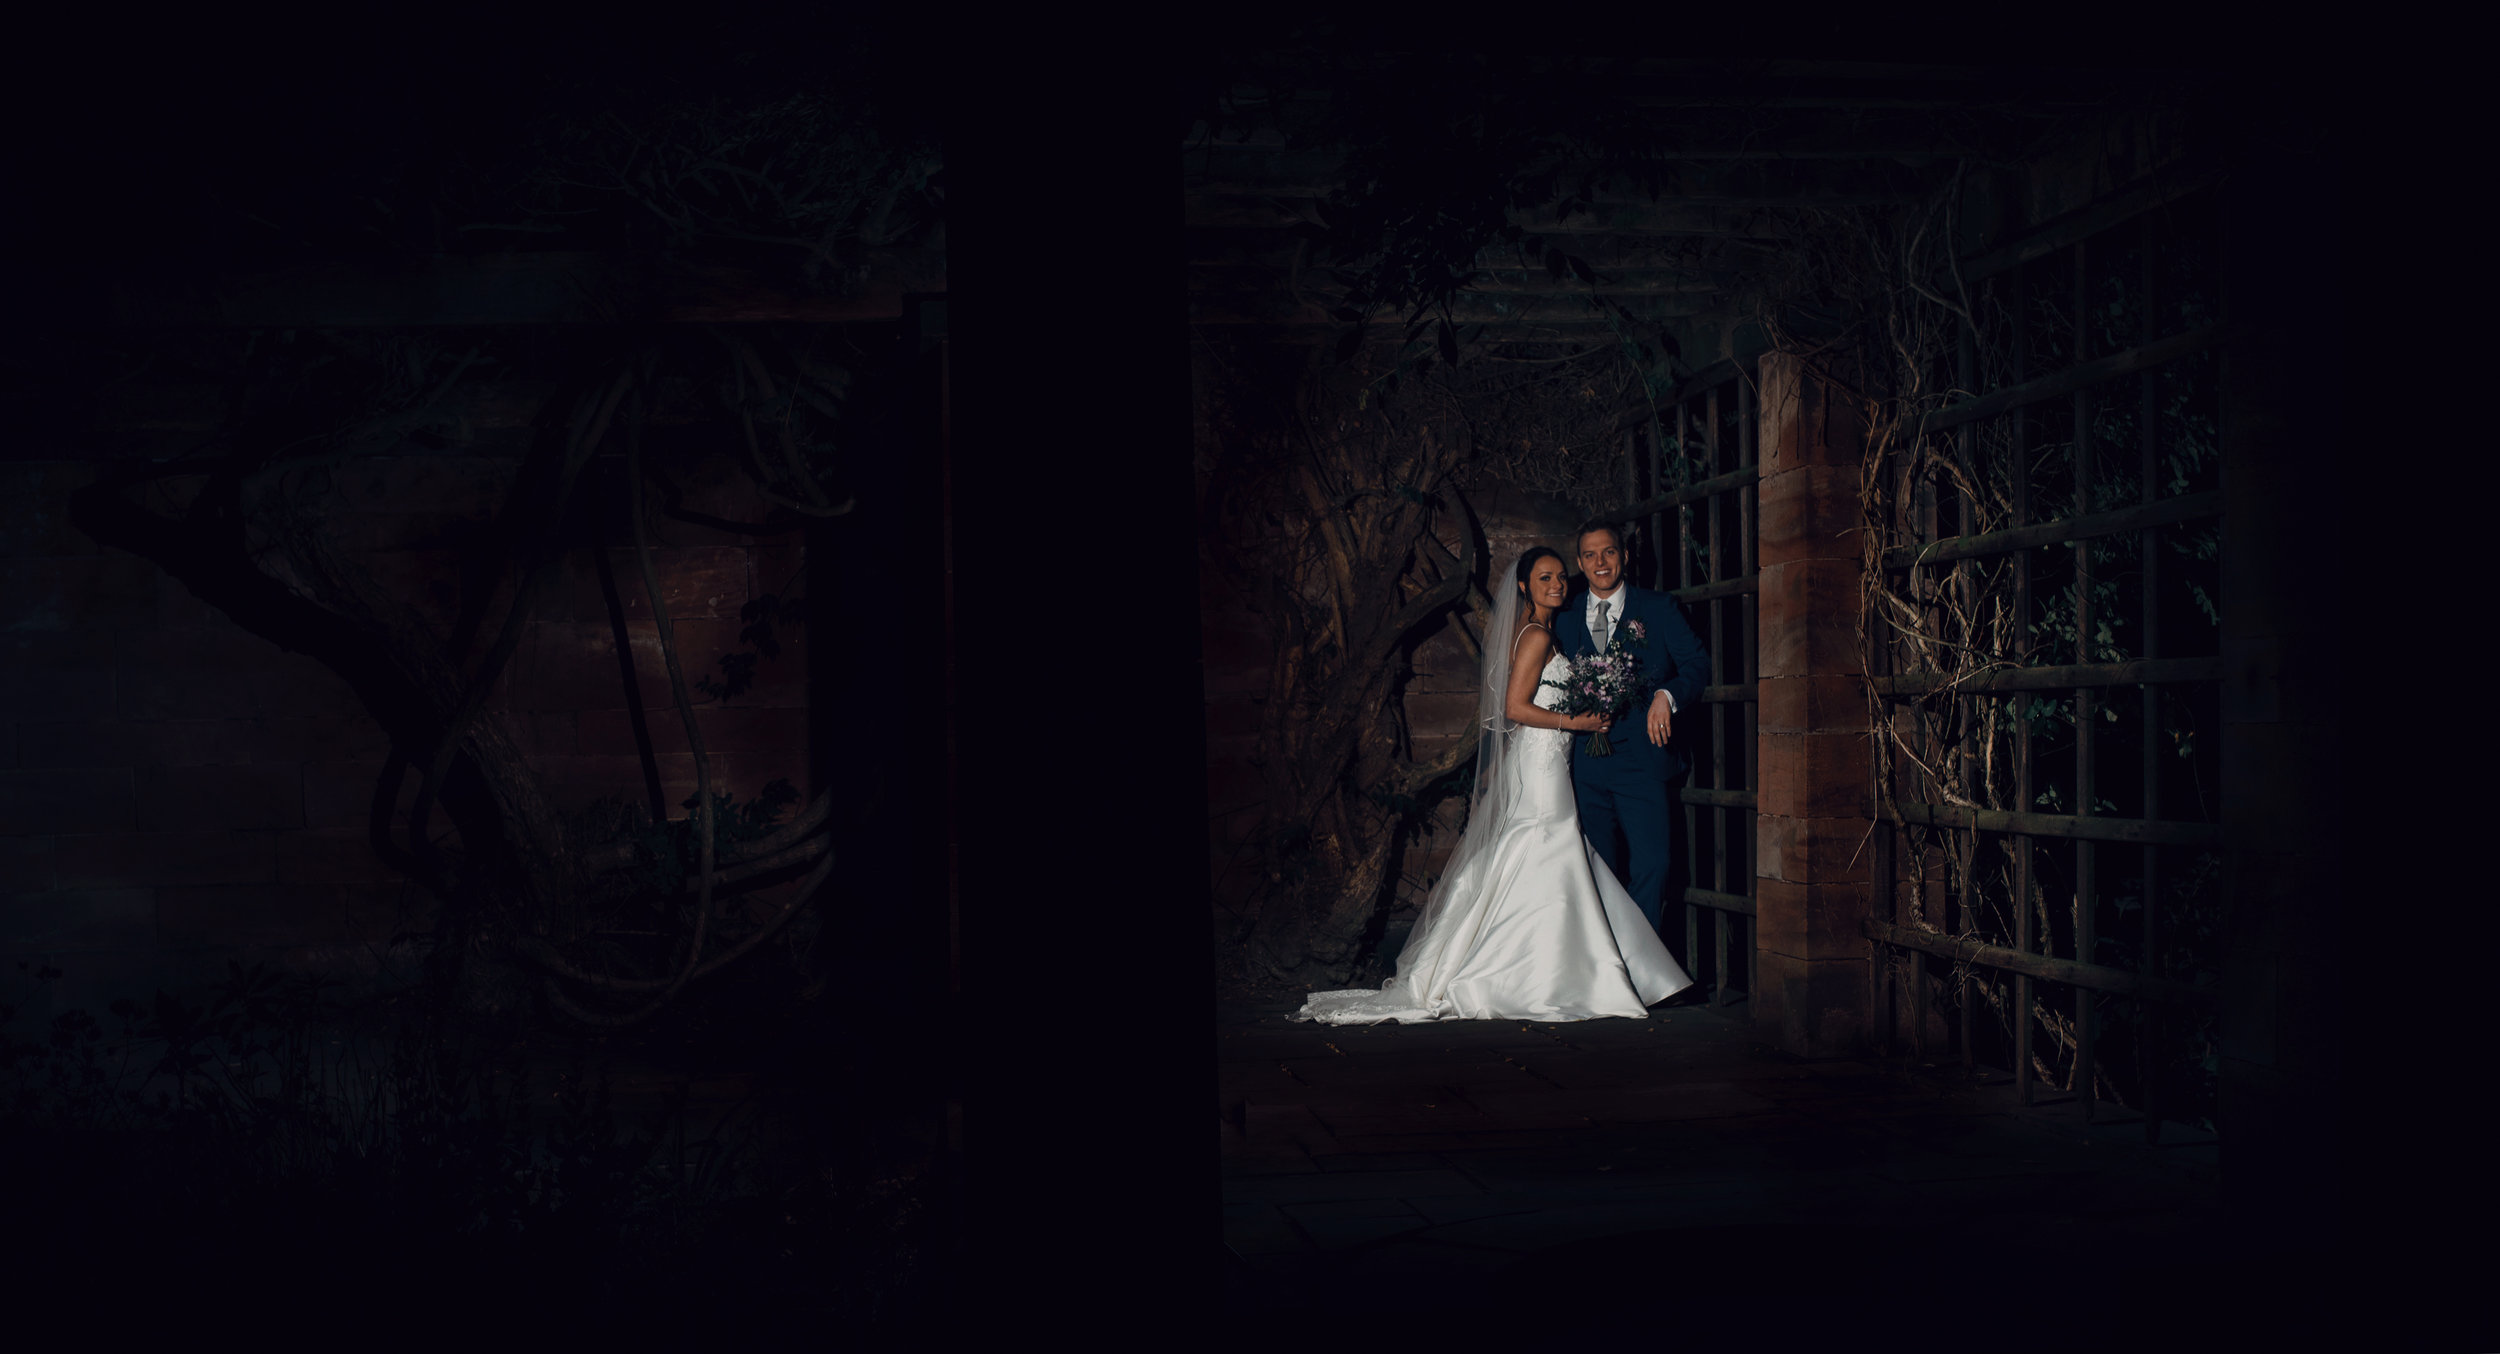 Jessica and Elliots wedding image from the couples portrait shoot at night - Inglewood Manor Wirral